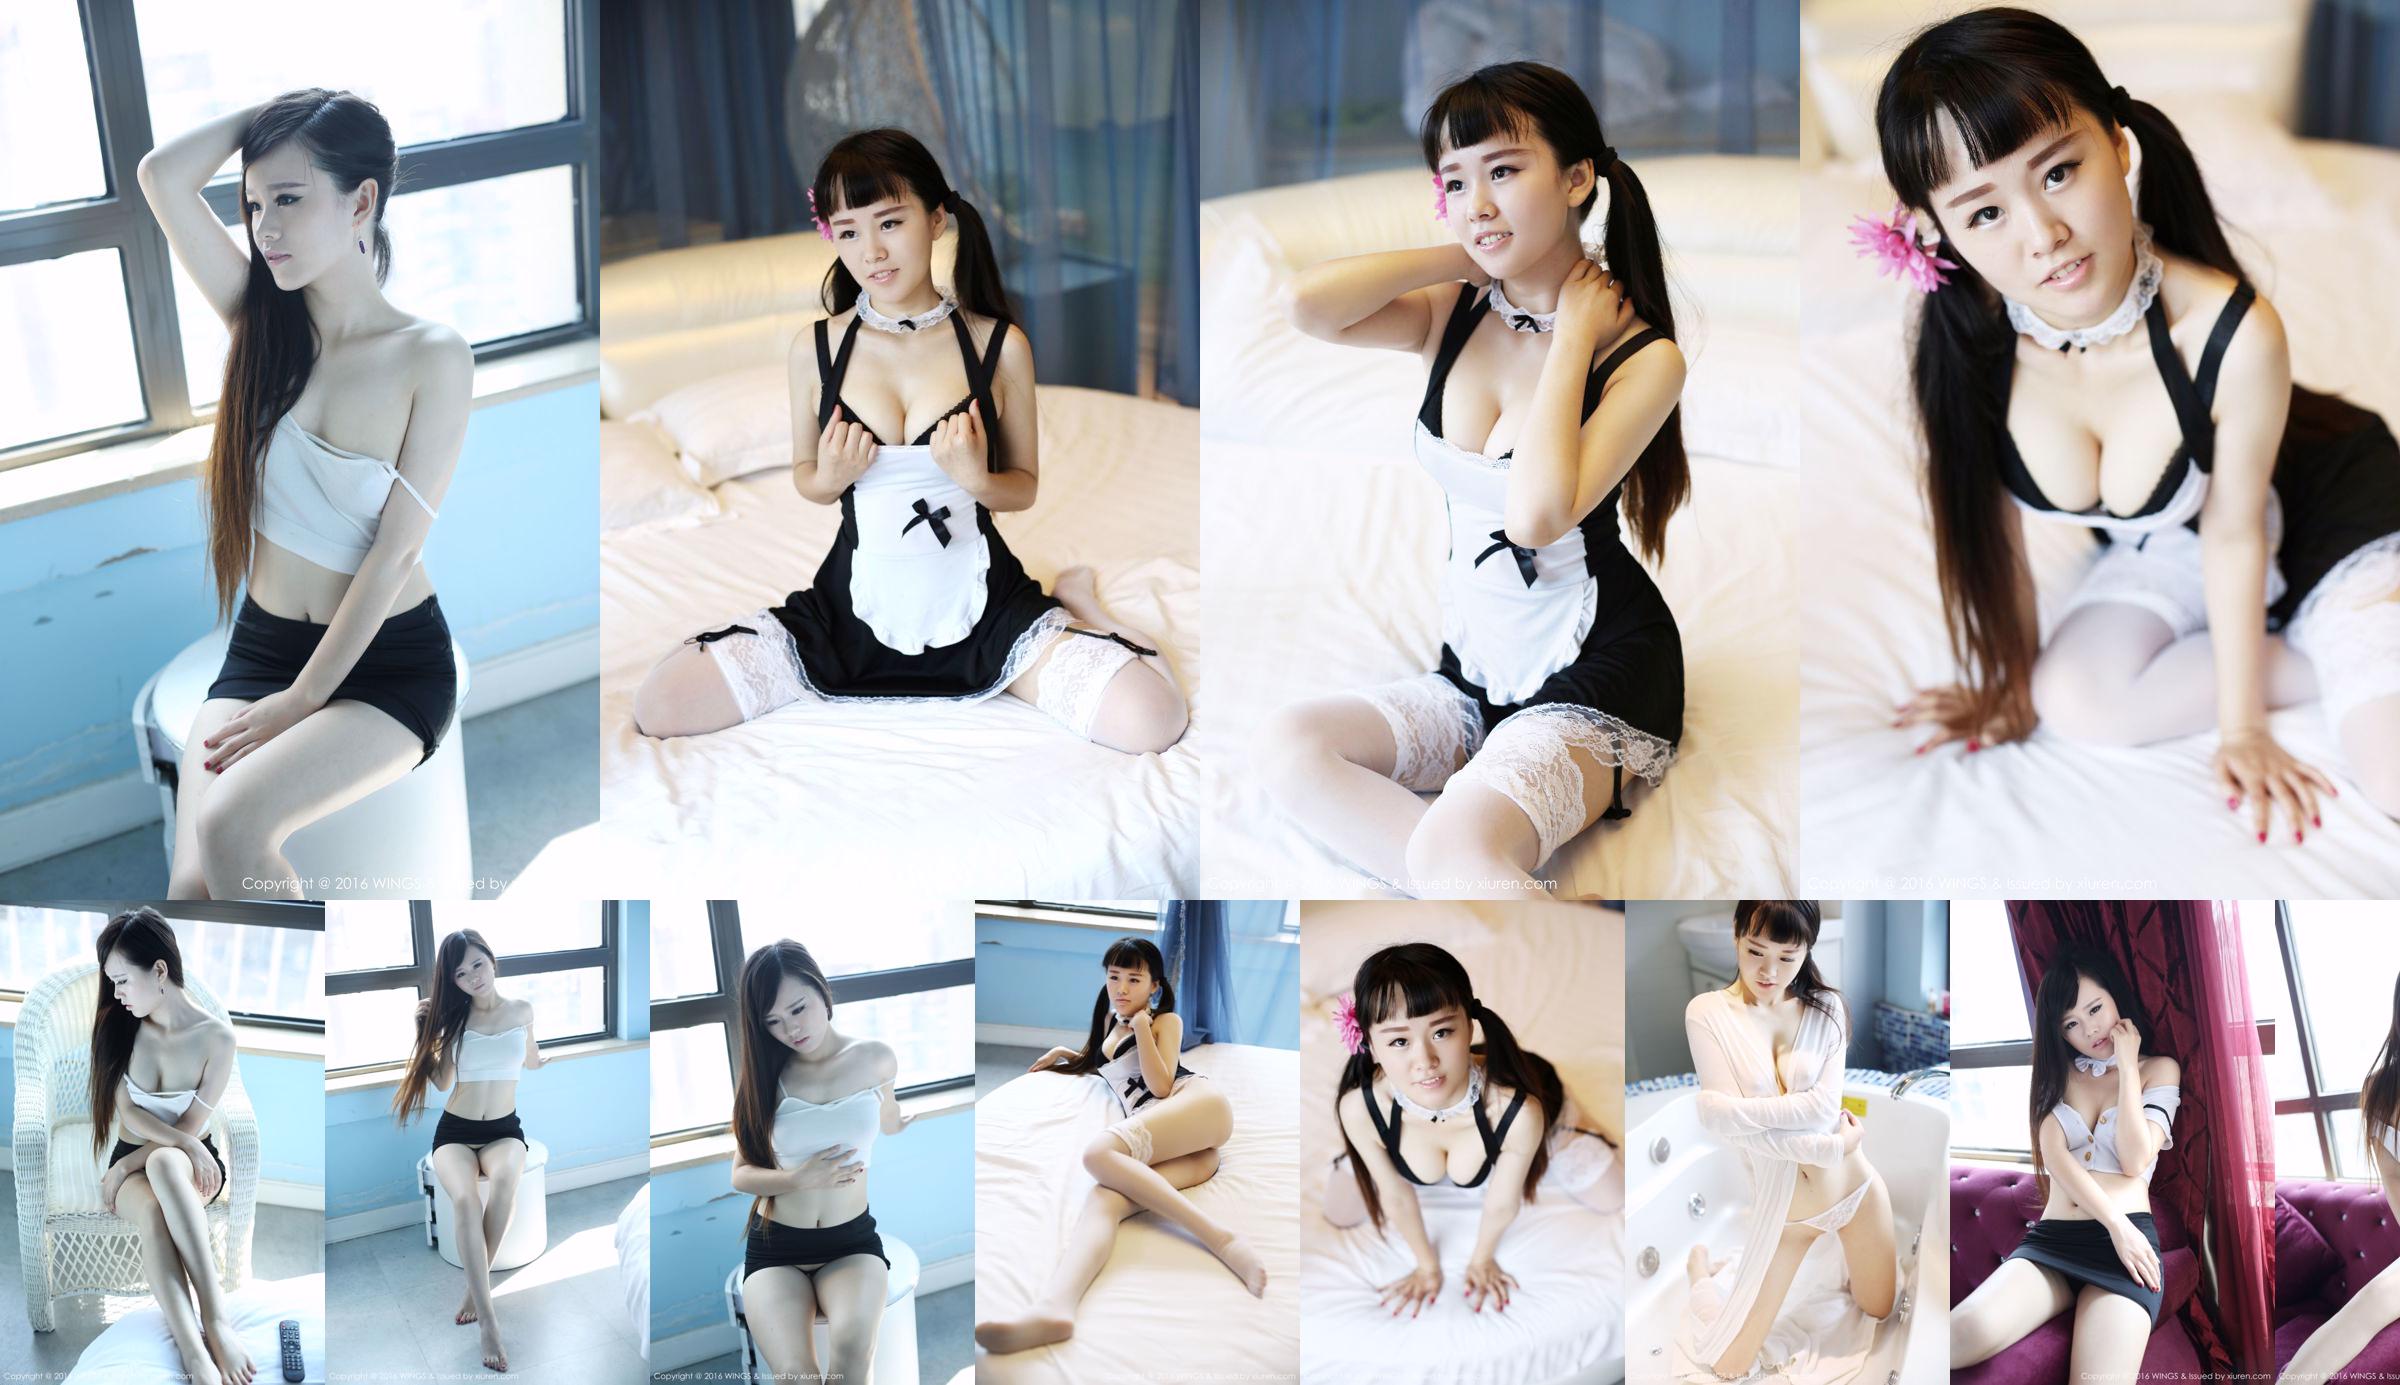 Meow Meow Cyan "A Girl in a Private House Bathhed in the Sun" [WingS 影私荟] Vol.022 No.623030 หน้า 14